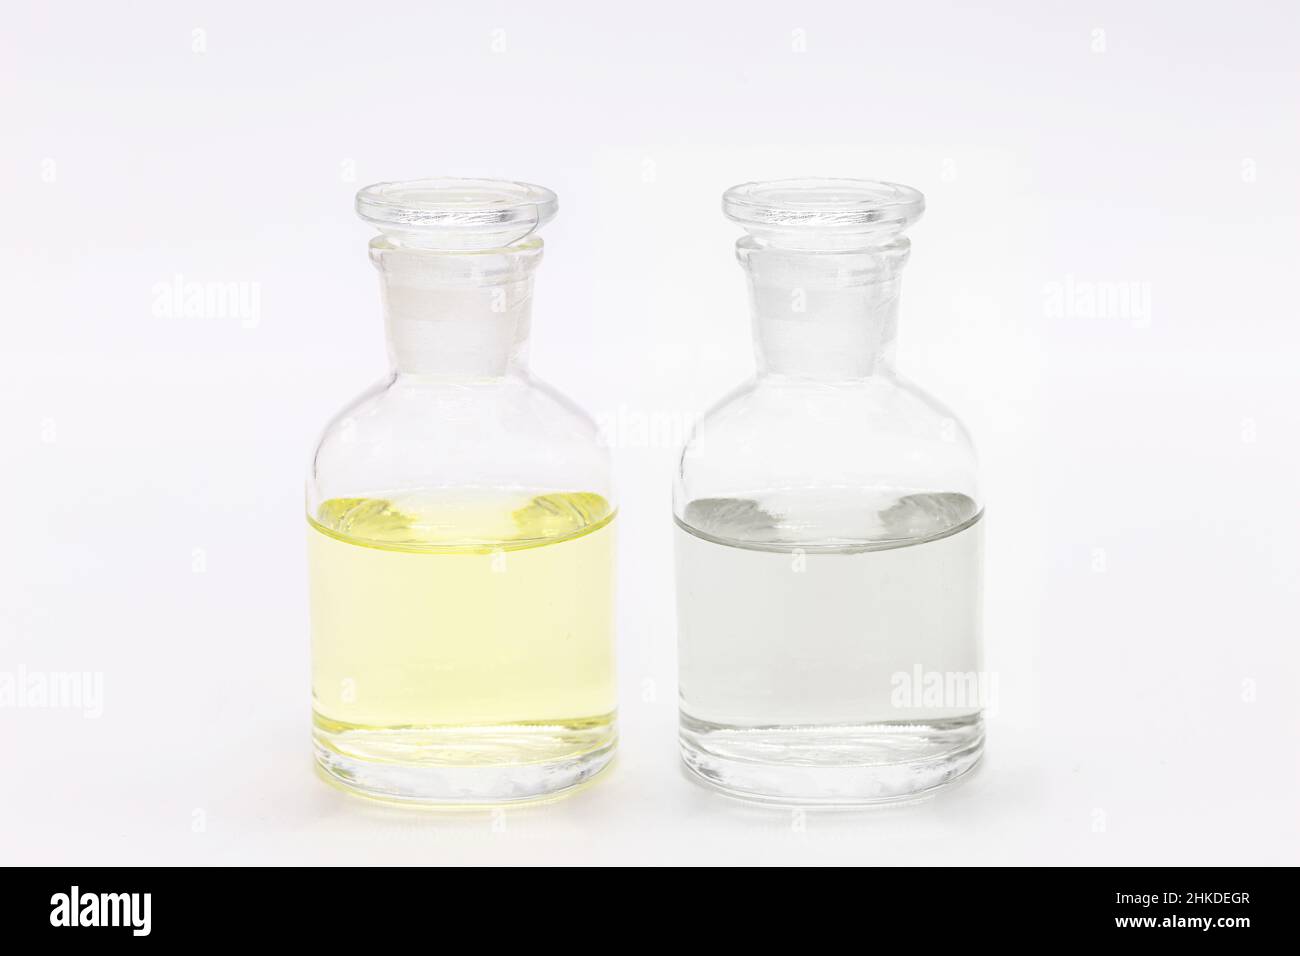 bottle of sodium chlorite next to activator Hydrochloric acid HCL, purifying chemicals and powerful disinfectants Stock Photo